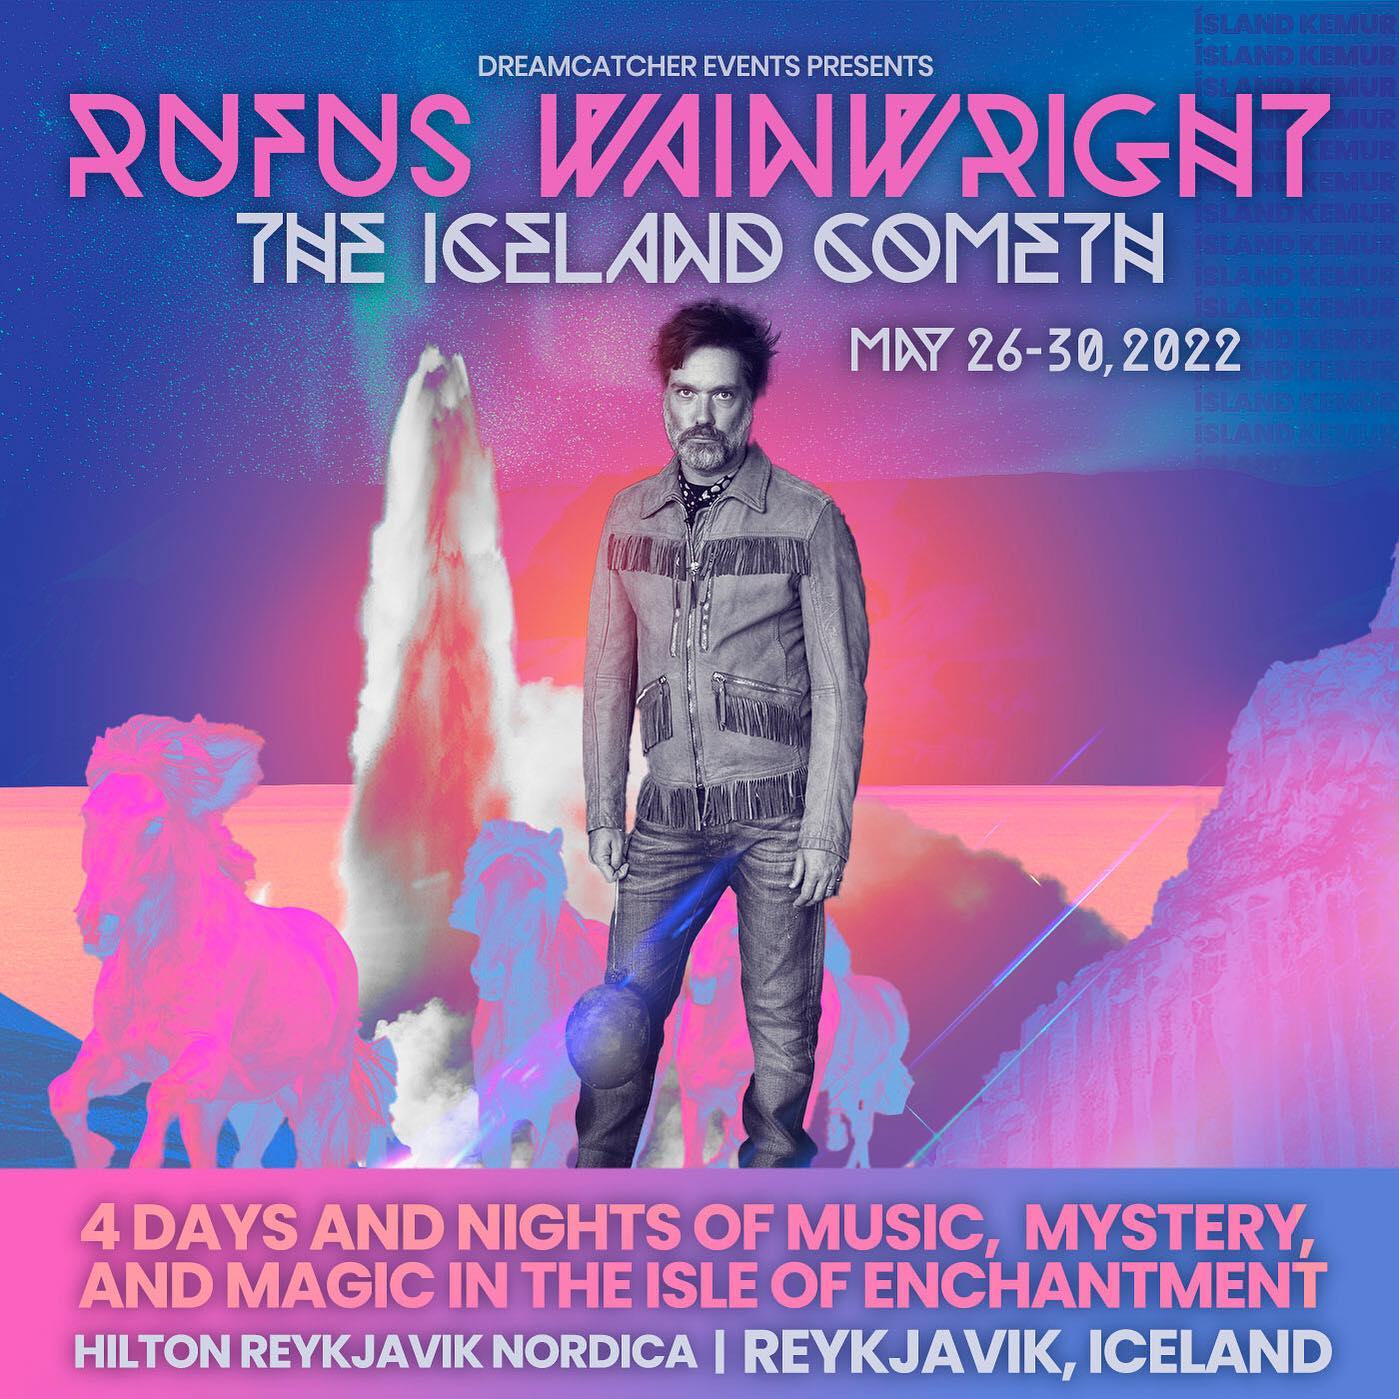 We can't wait for our first event in Iceland with the one and only @rufuswainwright! This amazing adventure will include a concert with Rufus at the world famous @harpareykjavik, a fly-over tour of Iceland, a trip to the Blue Lagoon & much more! Register by Christmas and SAVE 10%! Link is in our bio.